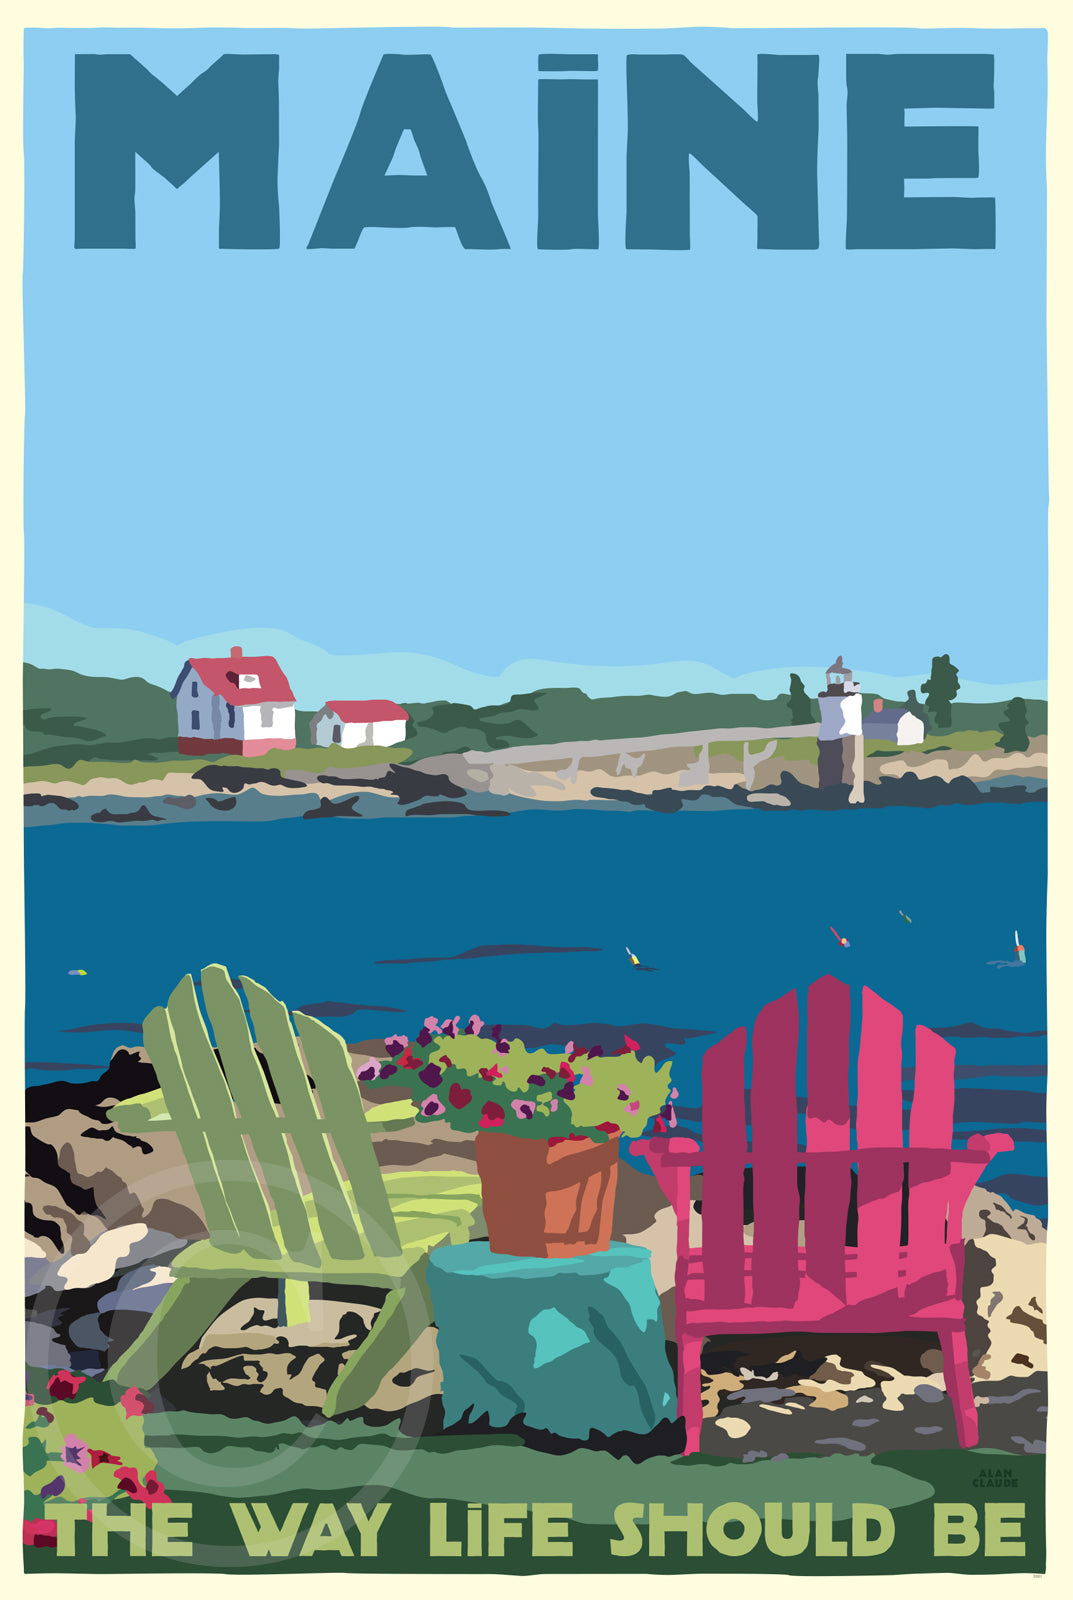 Chairs Overlooking Ram Island Art Print Maine The Way Life Should Be 36" x 53" Framed Wall Poster - Maine